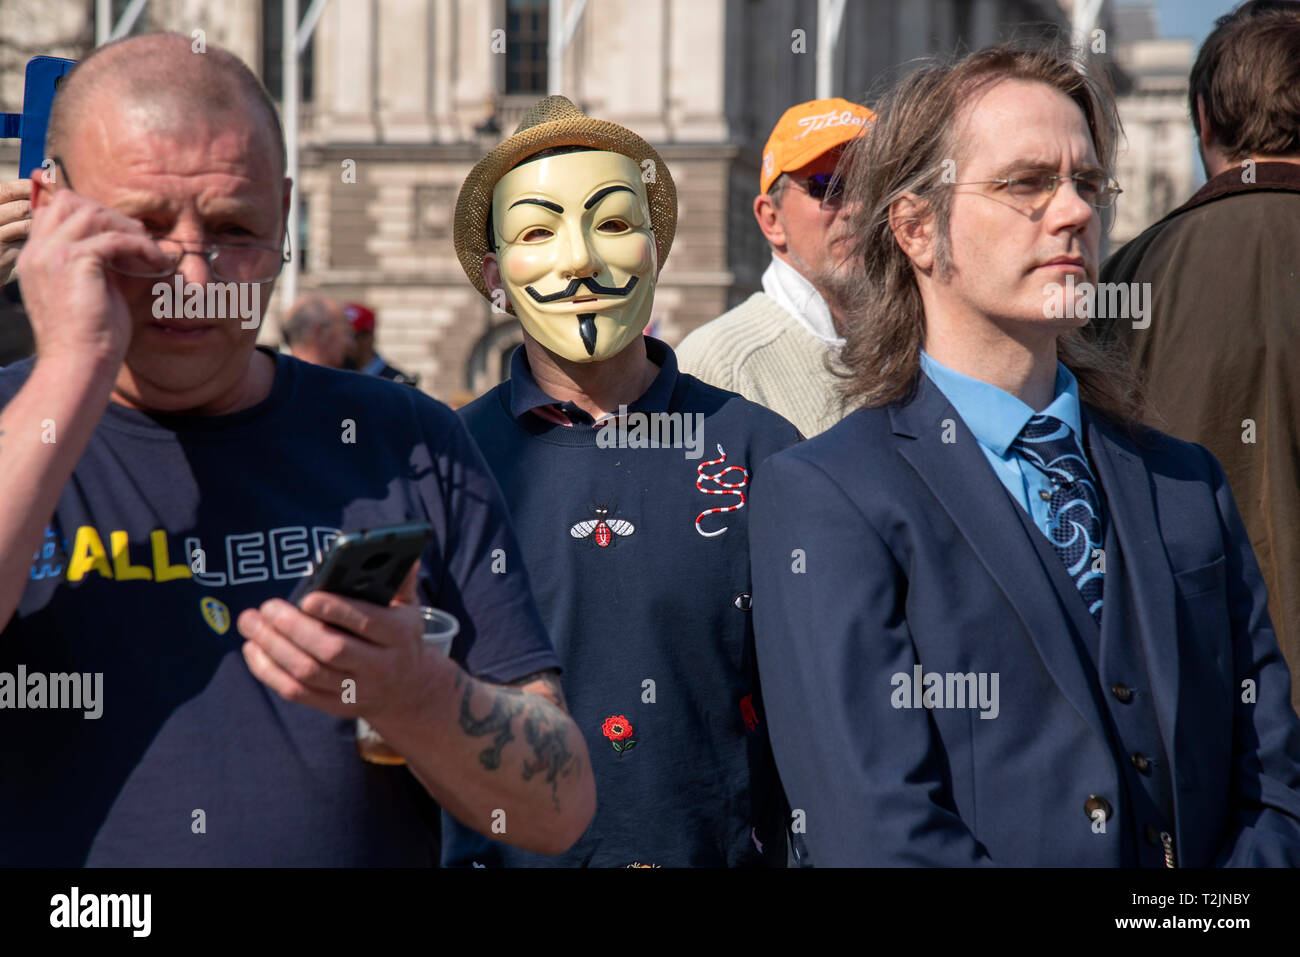 Brexit supporters at a rally outside the Houses of Parliament on 29 March 2019 - the day the UK was supposed to leave the EU. Stock Photo